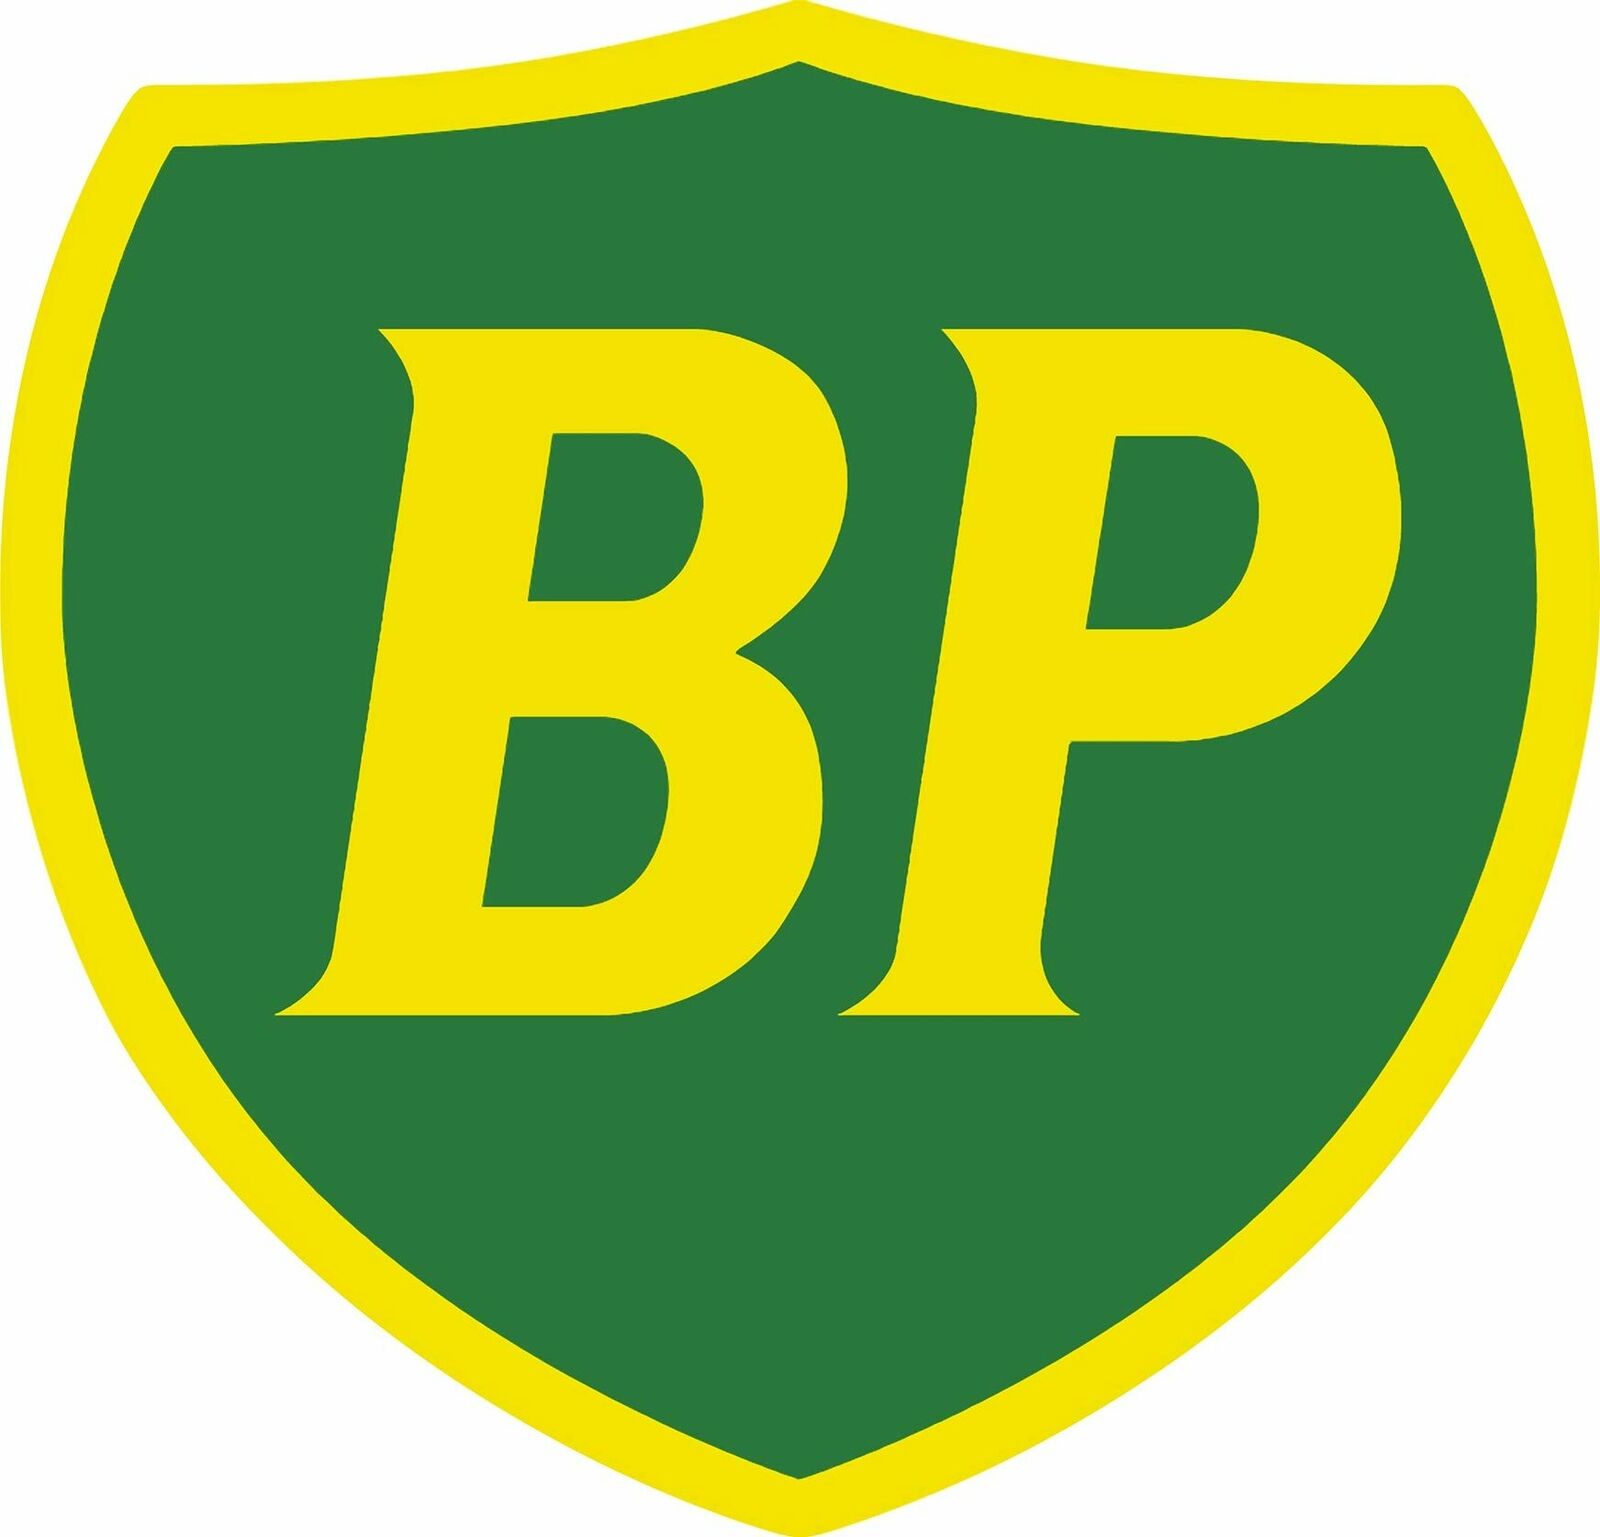 BP GREEN YELLOW SHIELD GASOLINE OIL HEAVY DUTY USA MADE METAL ADVERTISING SIGN